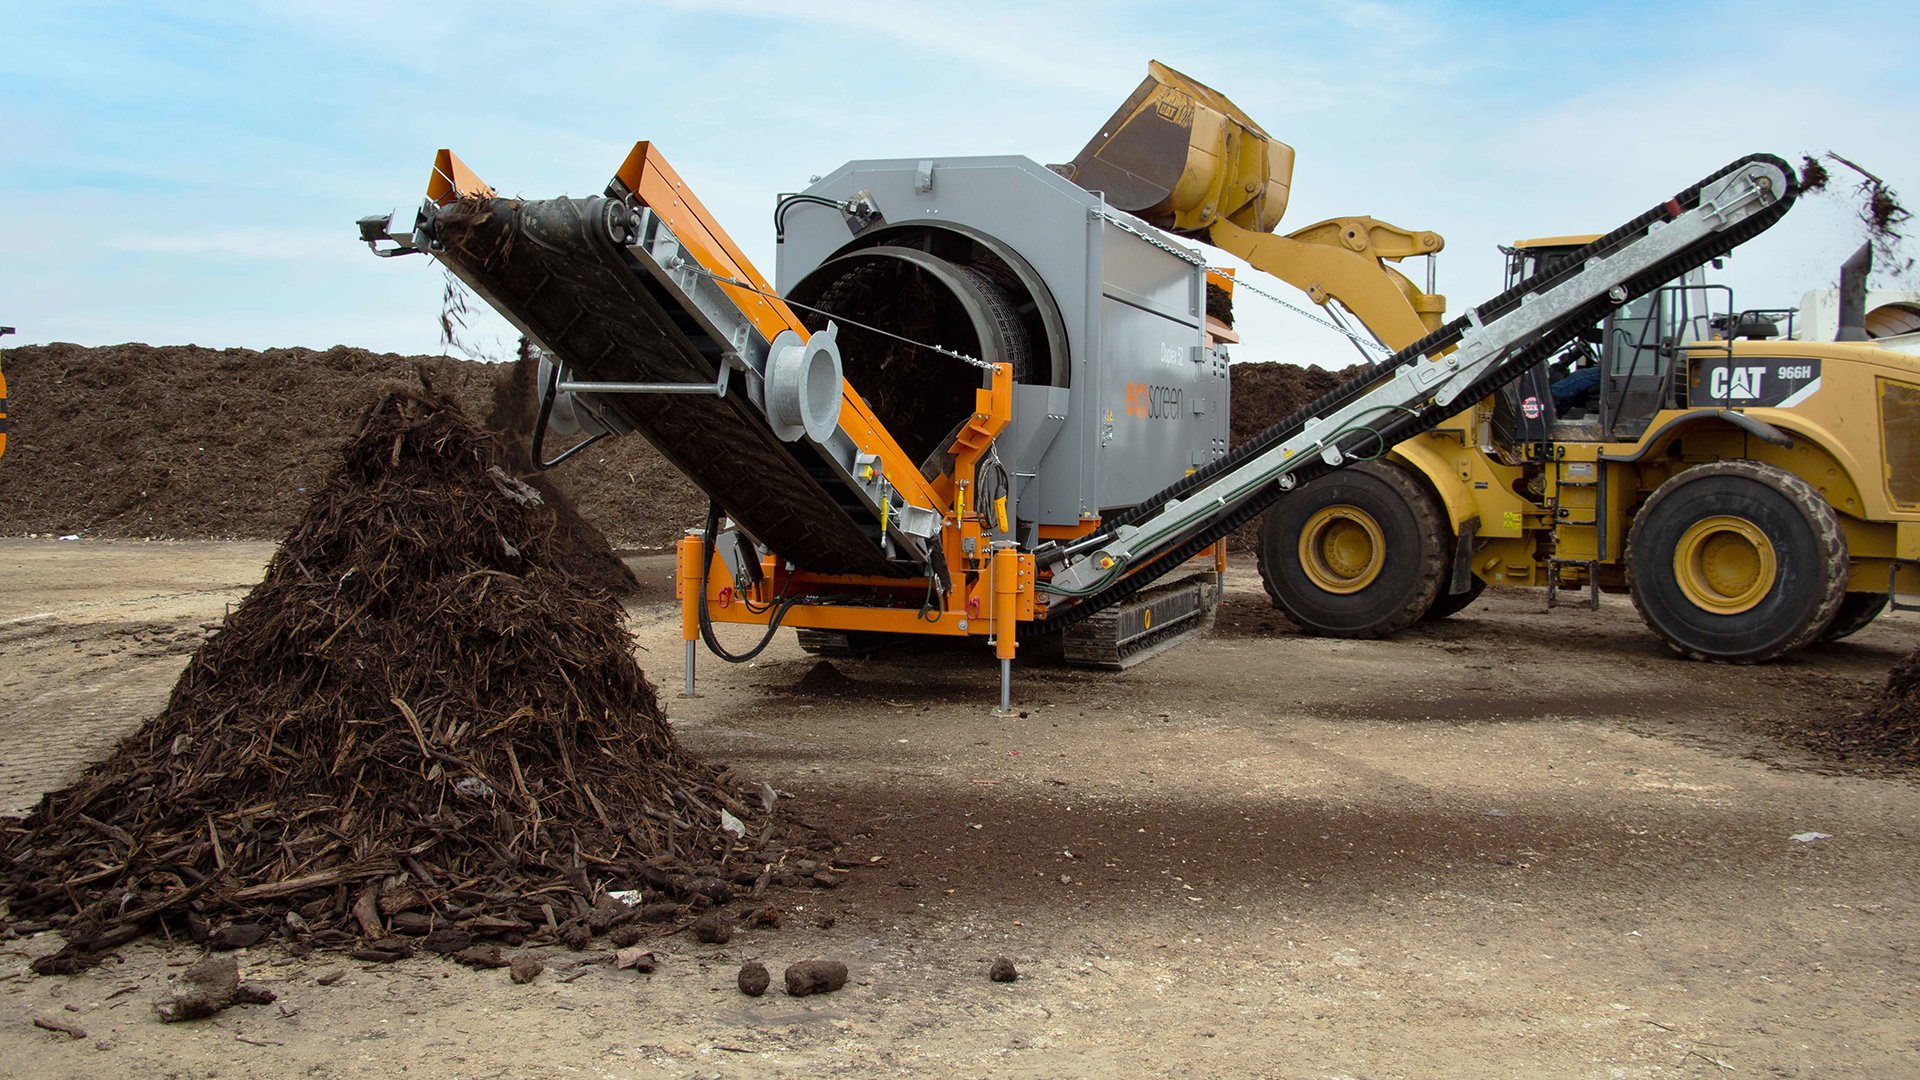 The double drum EcoScreen Duplex 52 trommel screen is separating material into different sized piles.